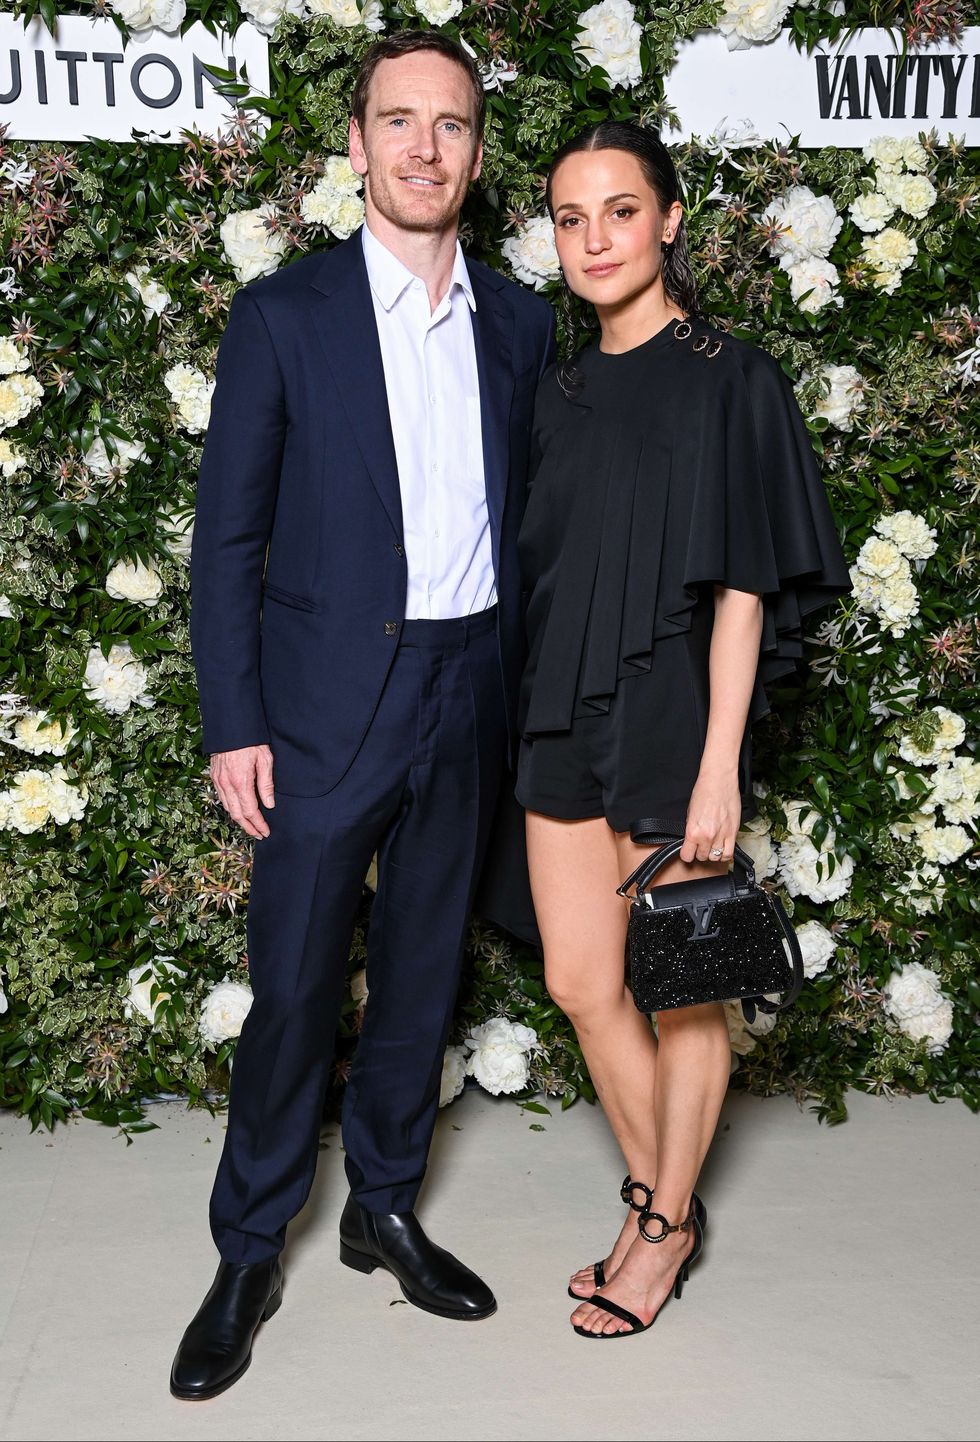 michael fassbender and alicia vikander attend the screening of "holy spider" during the 75th annual cannes film festival at palais des festivals on may 22, 2022 in cannes, france